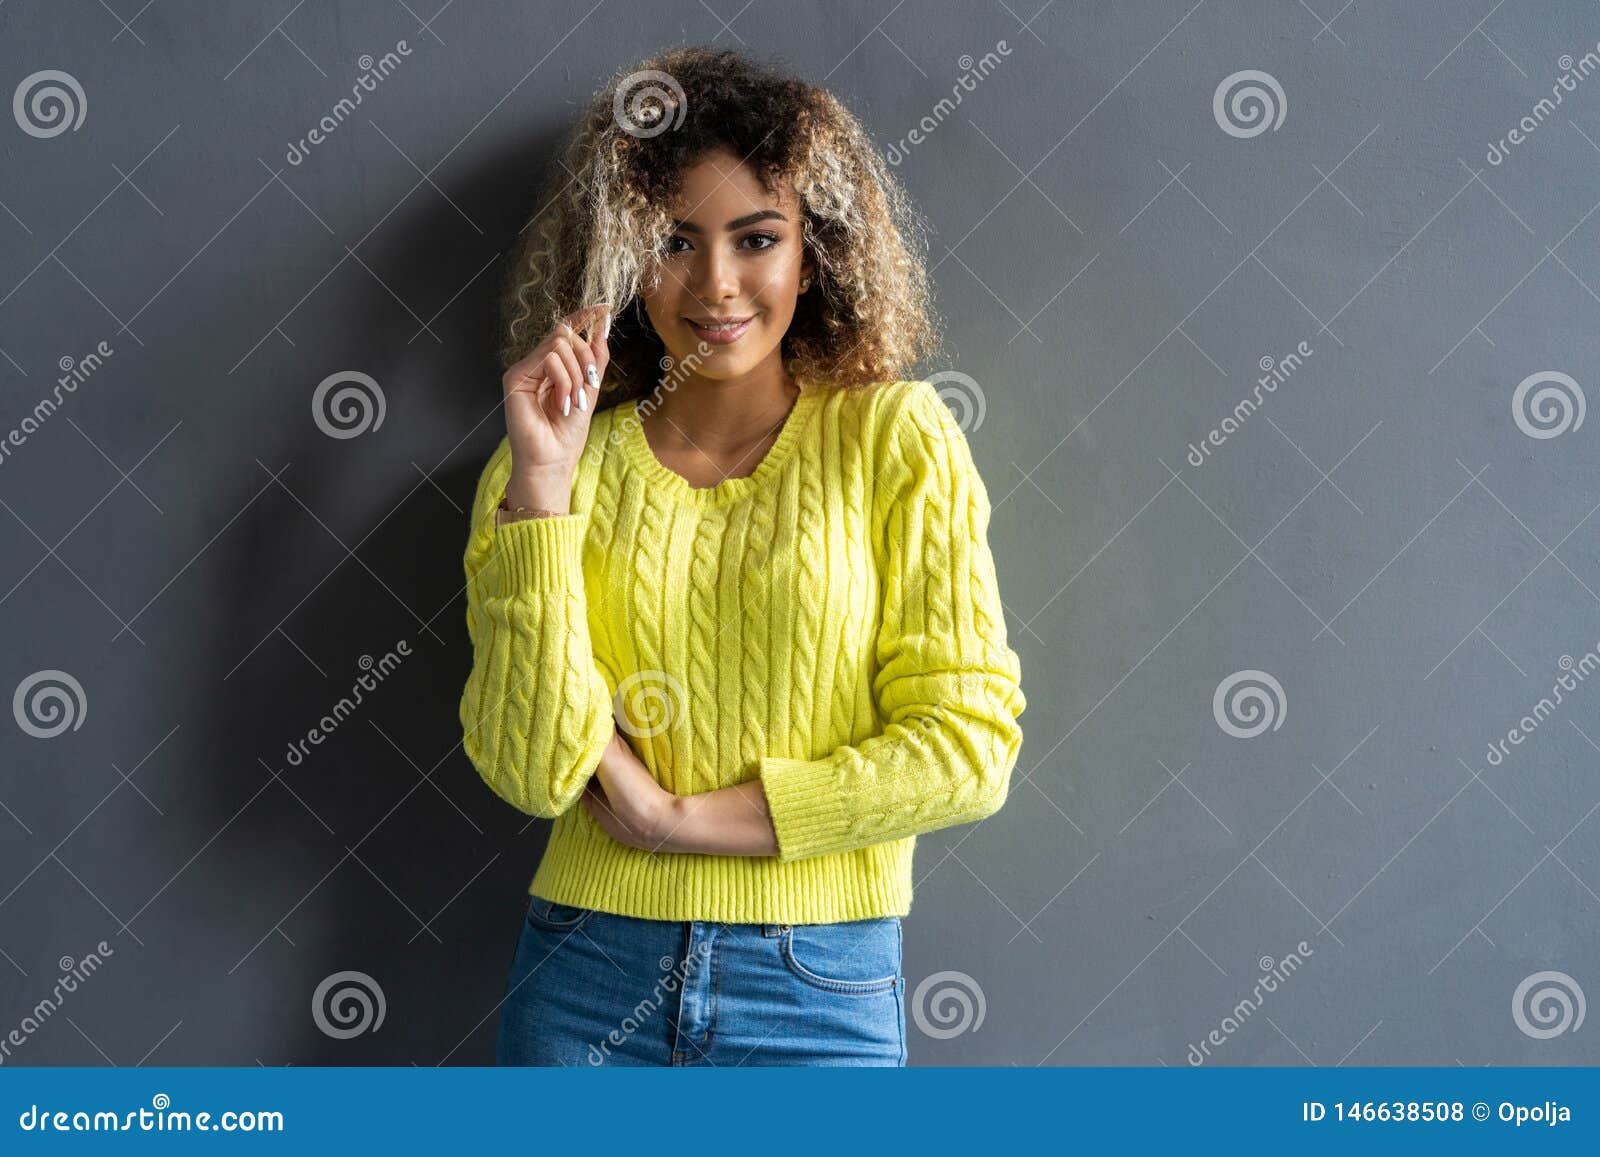 Portrait Of Young Beautiful Cute Cheerful Black Girl Smiling Looking At Camera Over Gray 